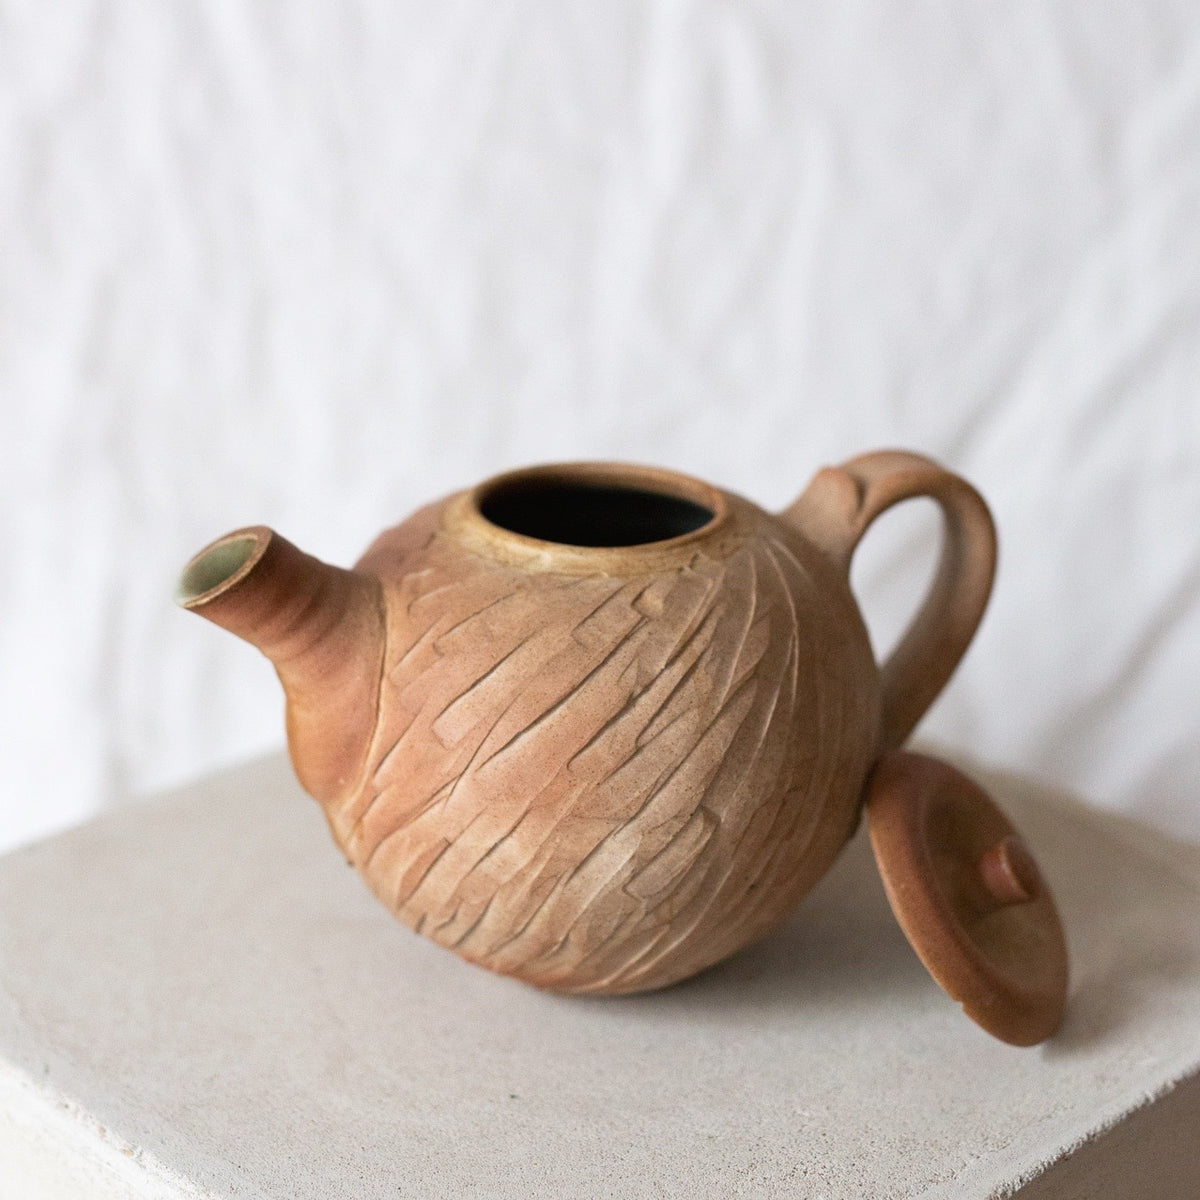 Carved clay teapot